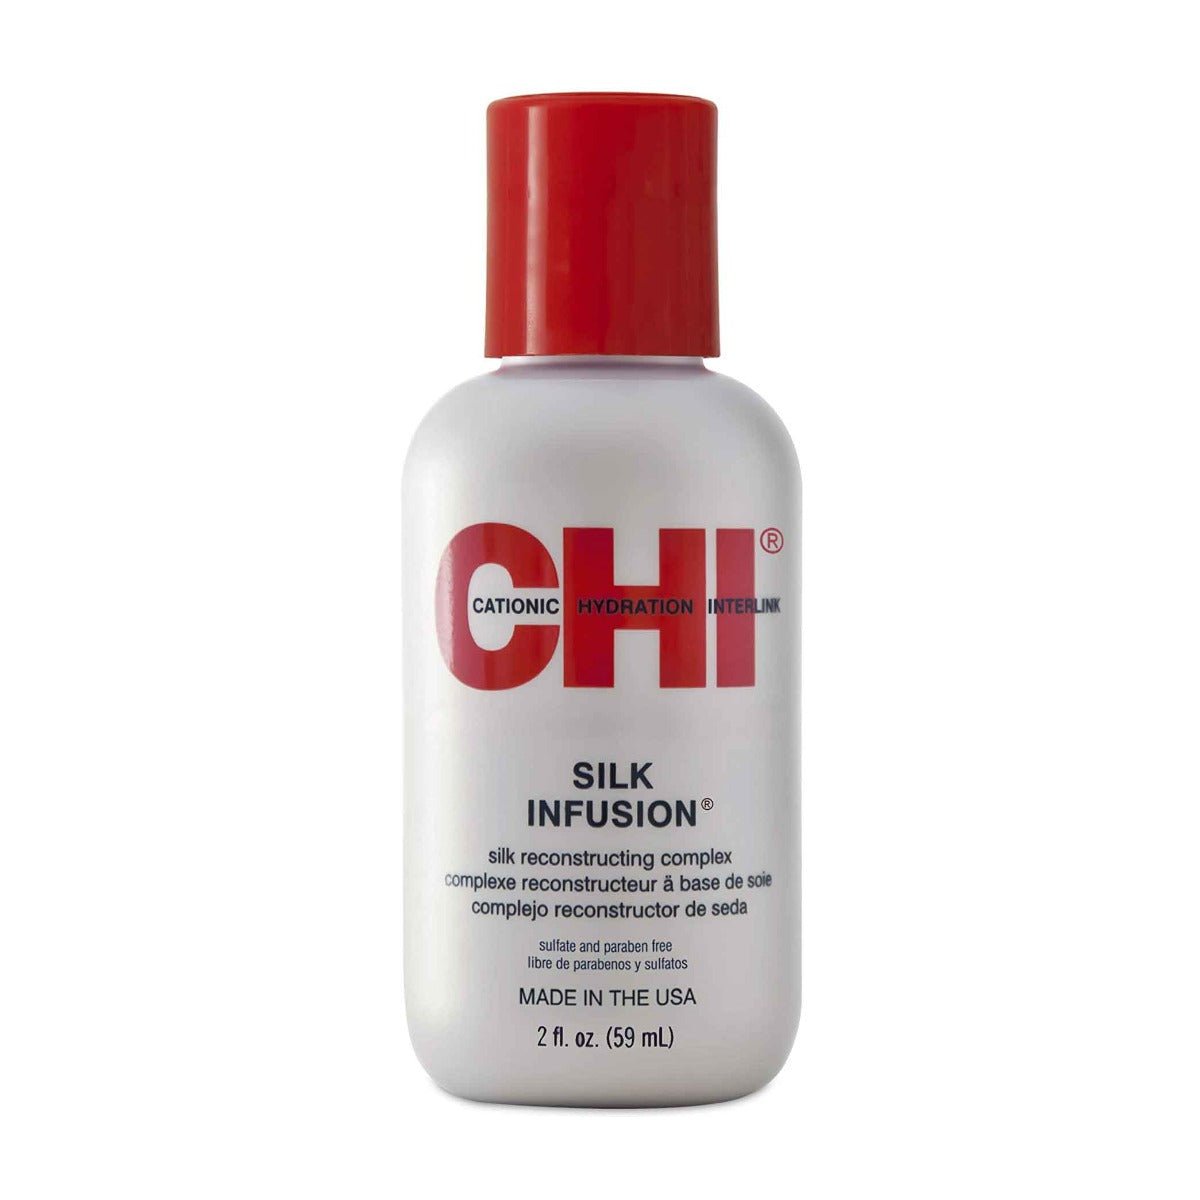 CHI Silk Infusion - Bloom Pharmacy